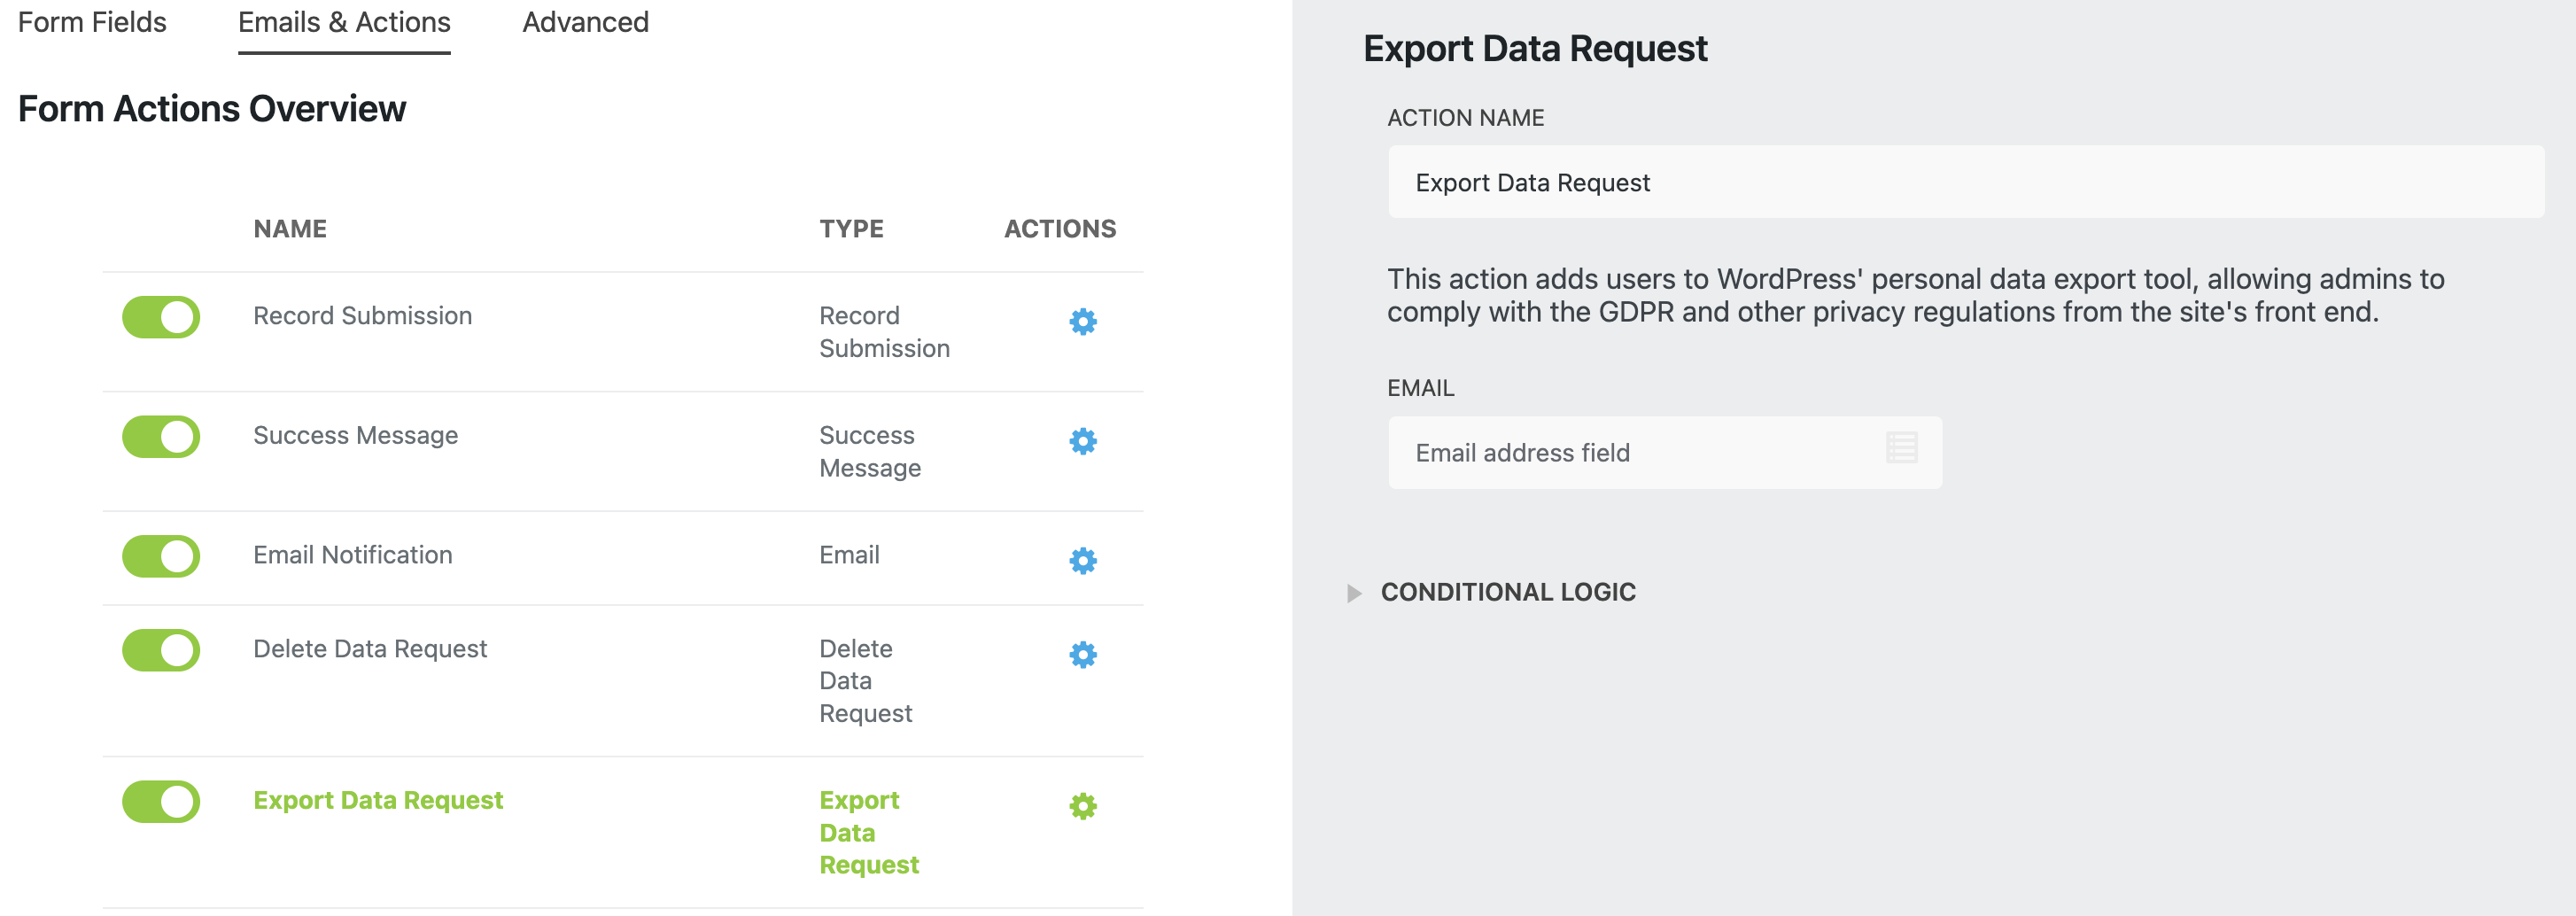 export data request form action